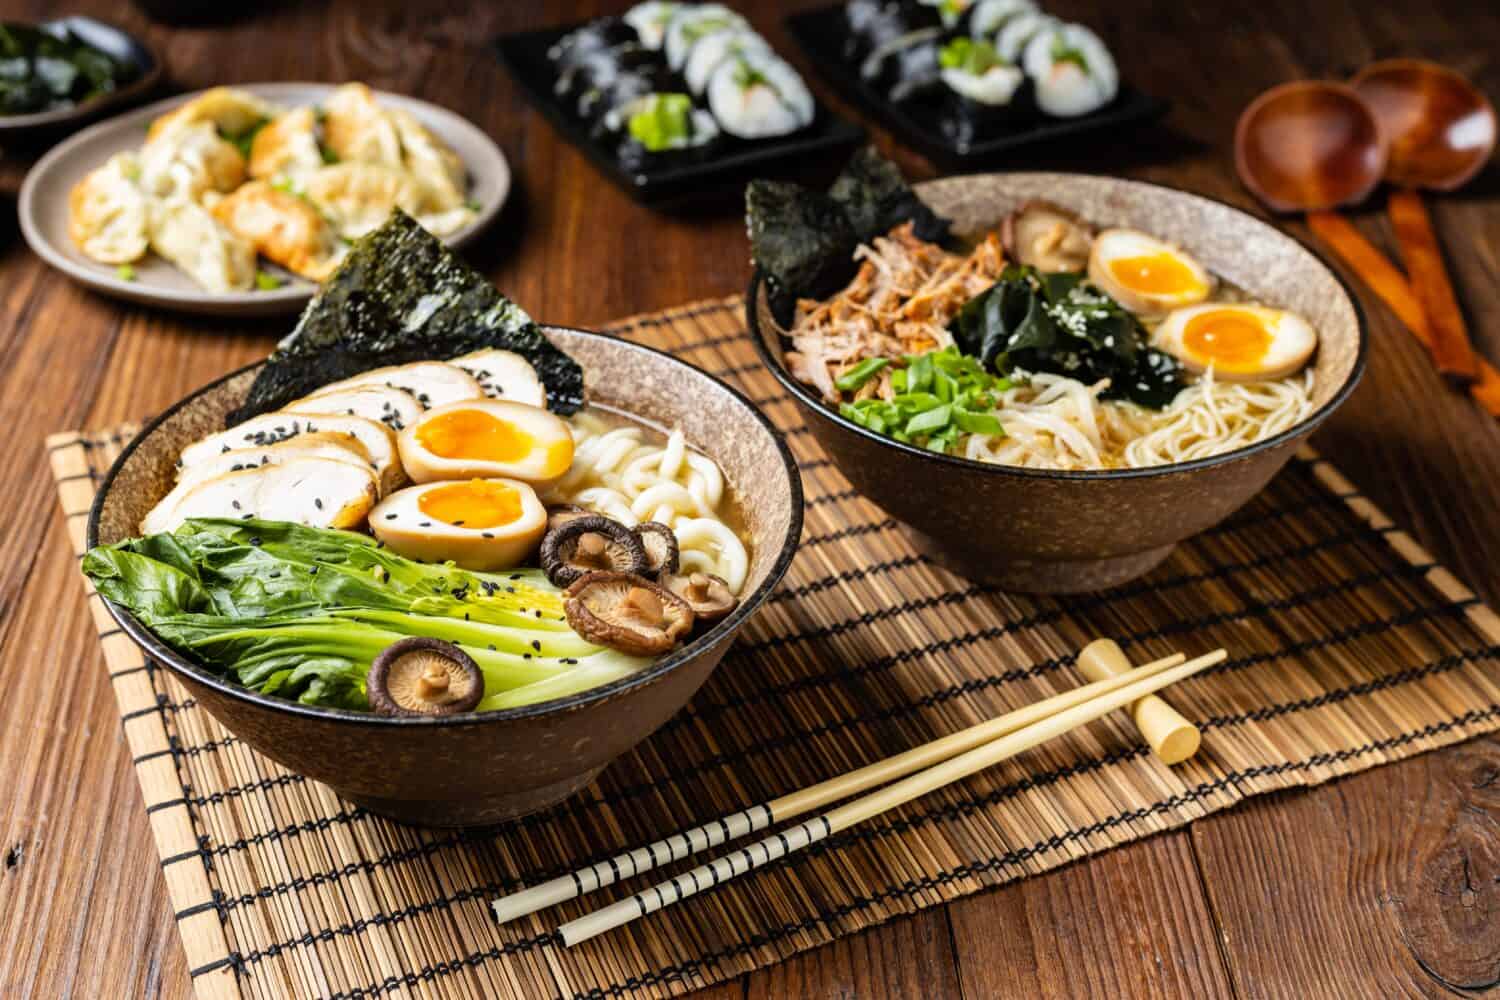 Traditional ramen with jerked pork or chicken. With udon or ramen noodles. Served in classic bowls. Gyoza dumplings and mushrooms in the background. Natural wooden background.